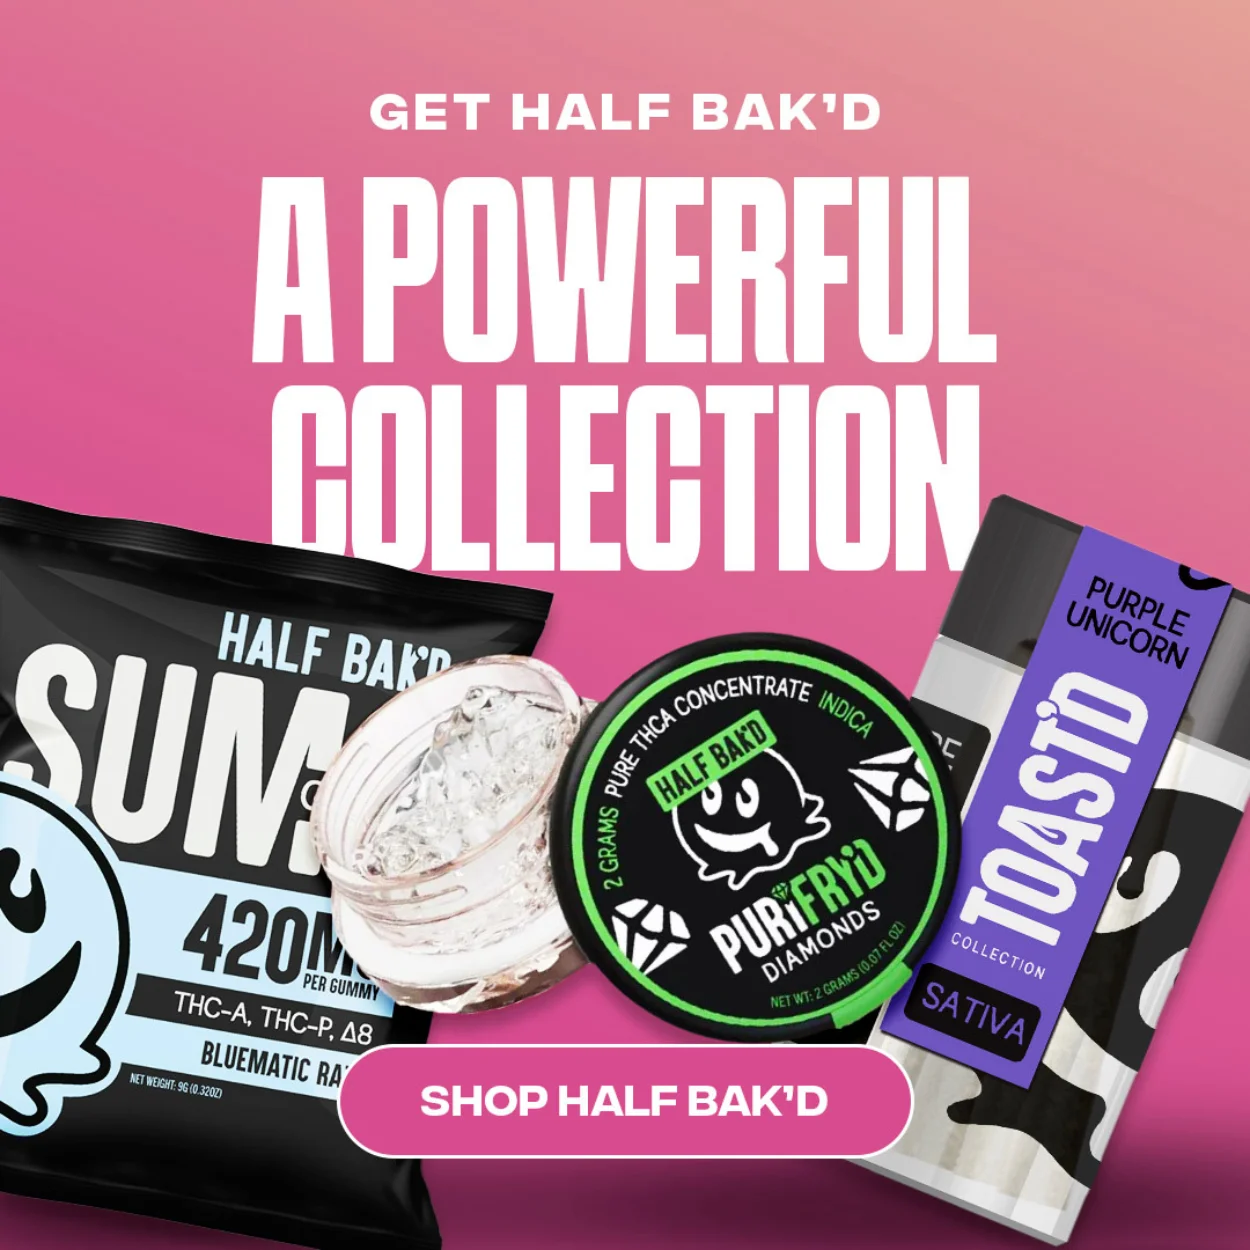 Get Baked with Our Half Bak'd Collection